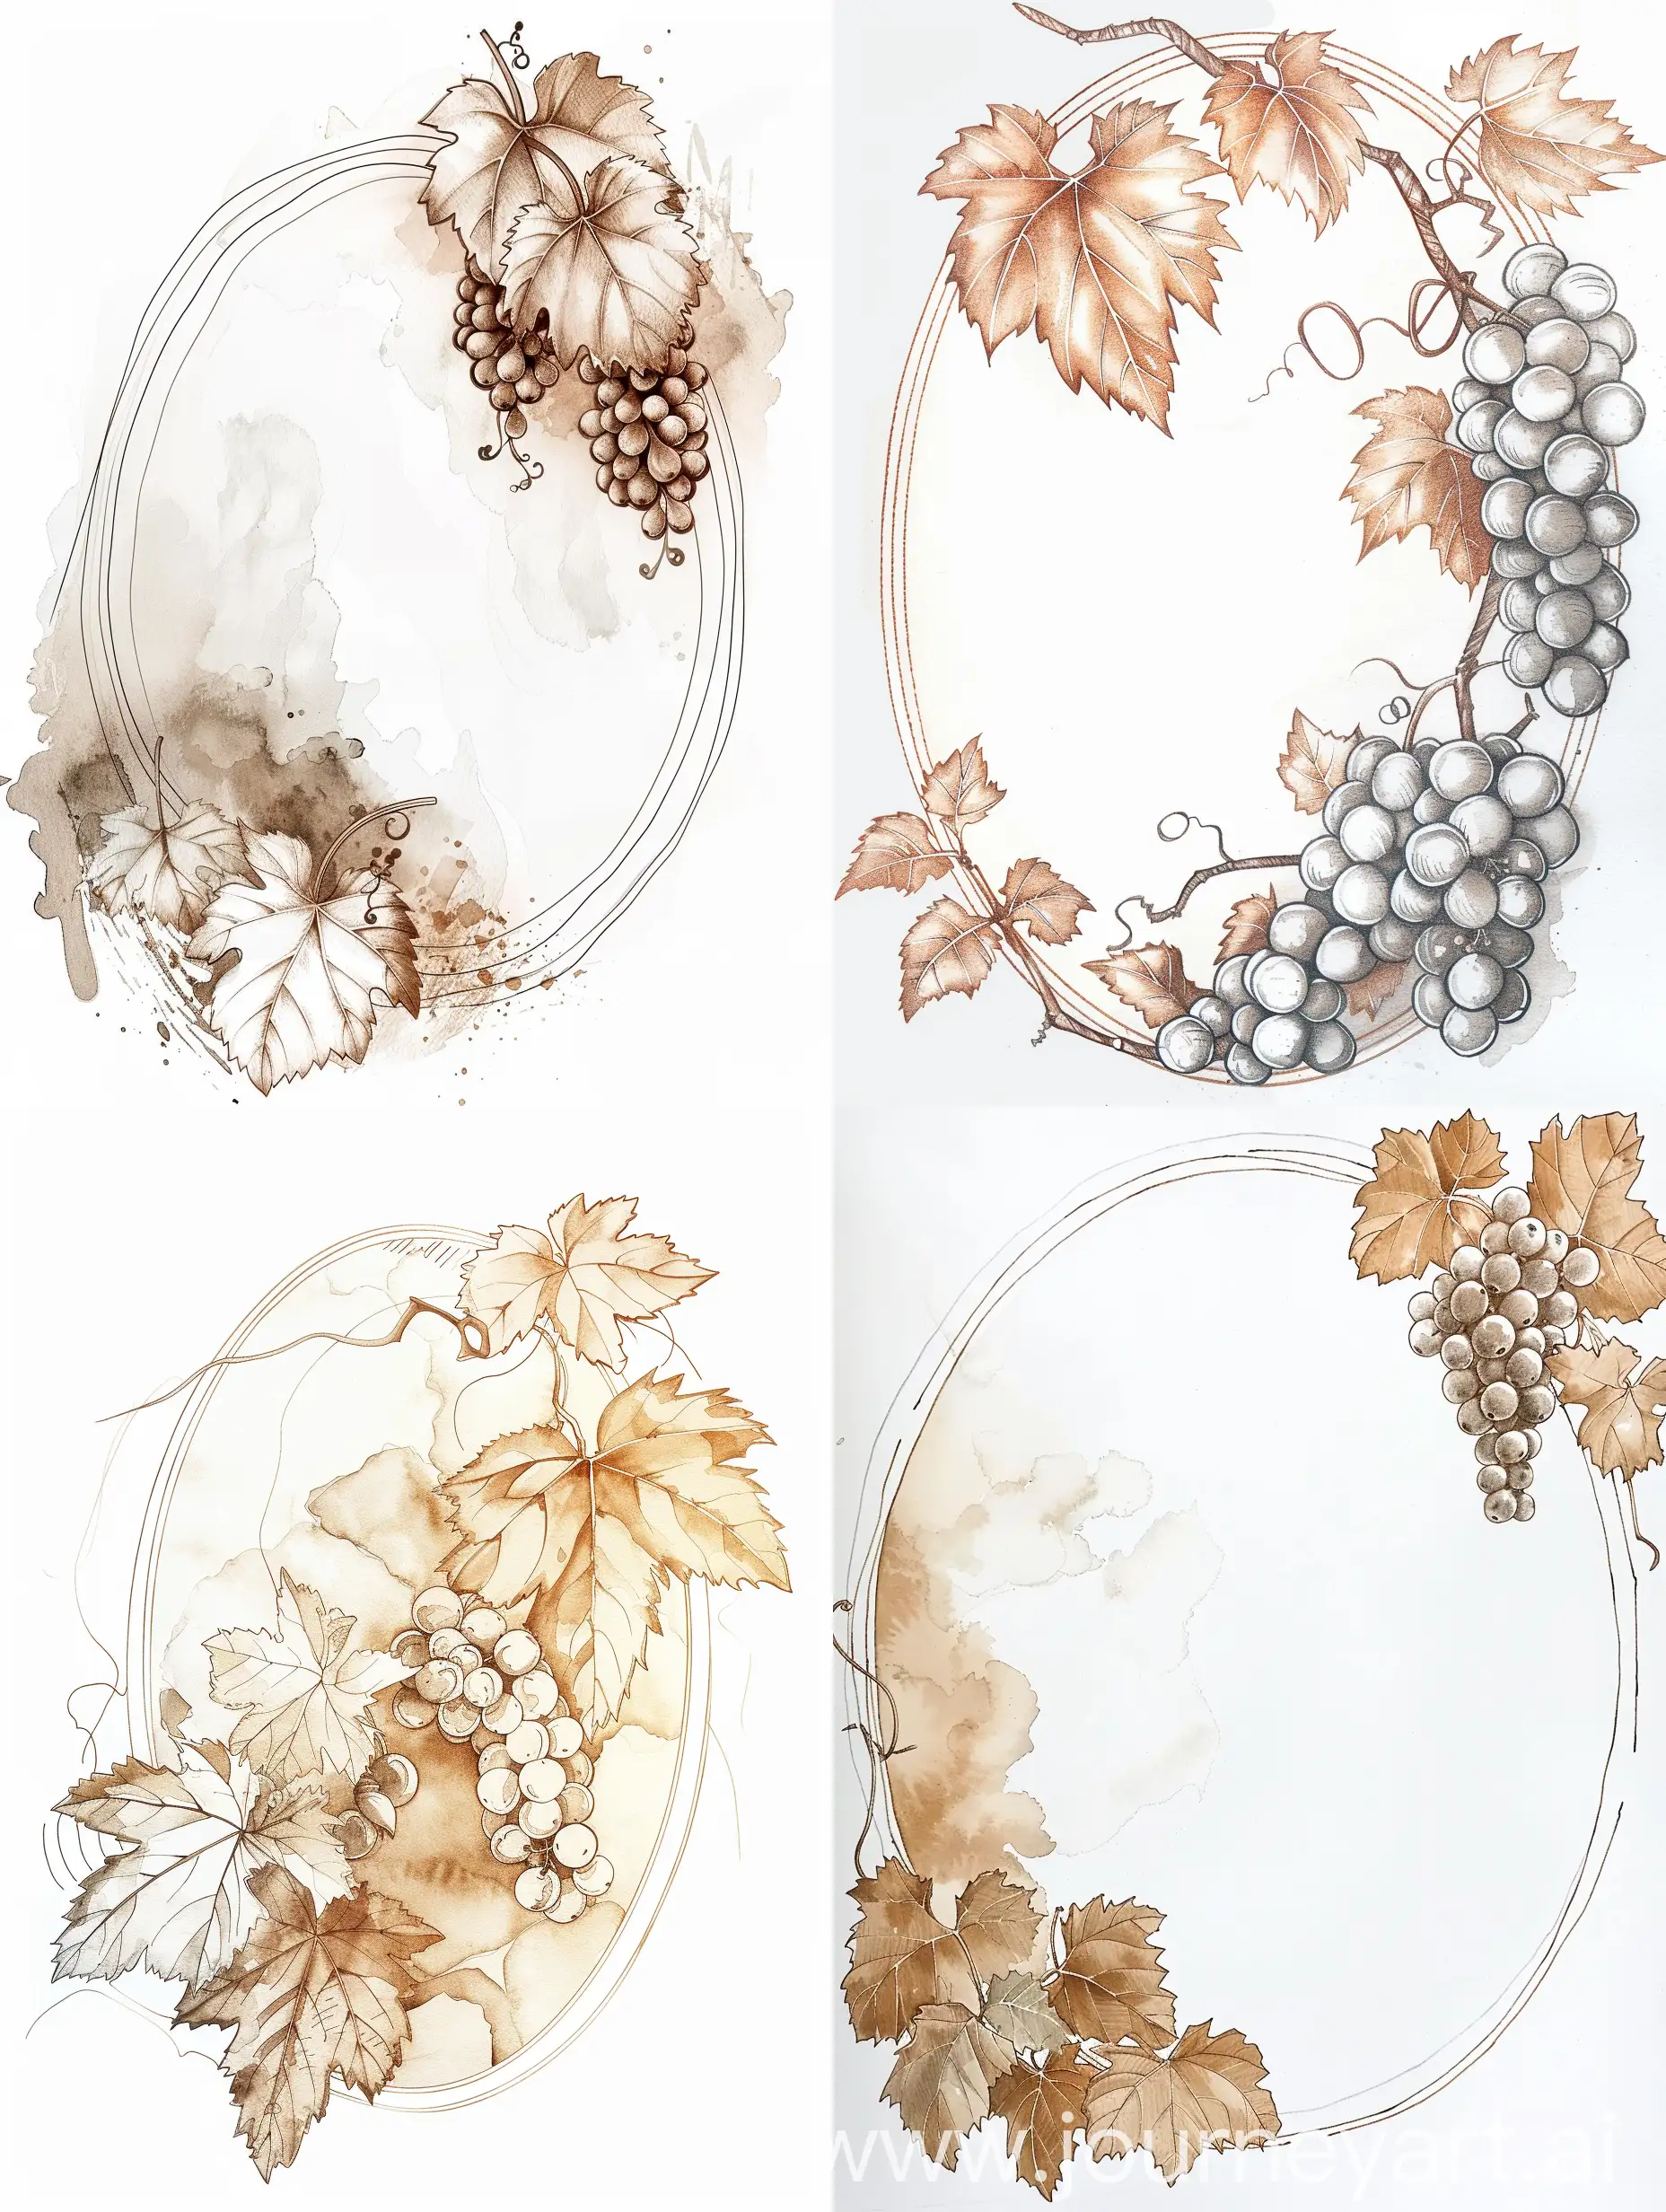 Graceful-Grapevine-Ornament-on-White-Background-in-Victoria-Ngai-Style